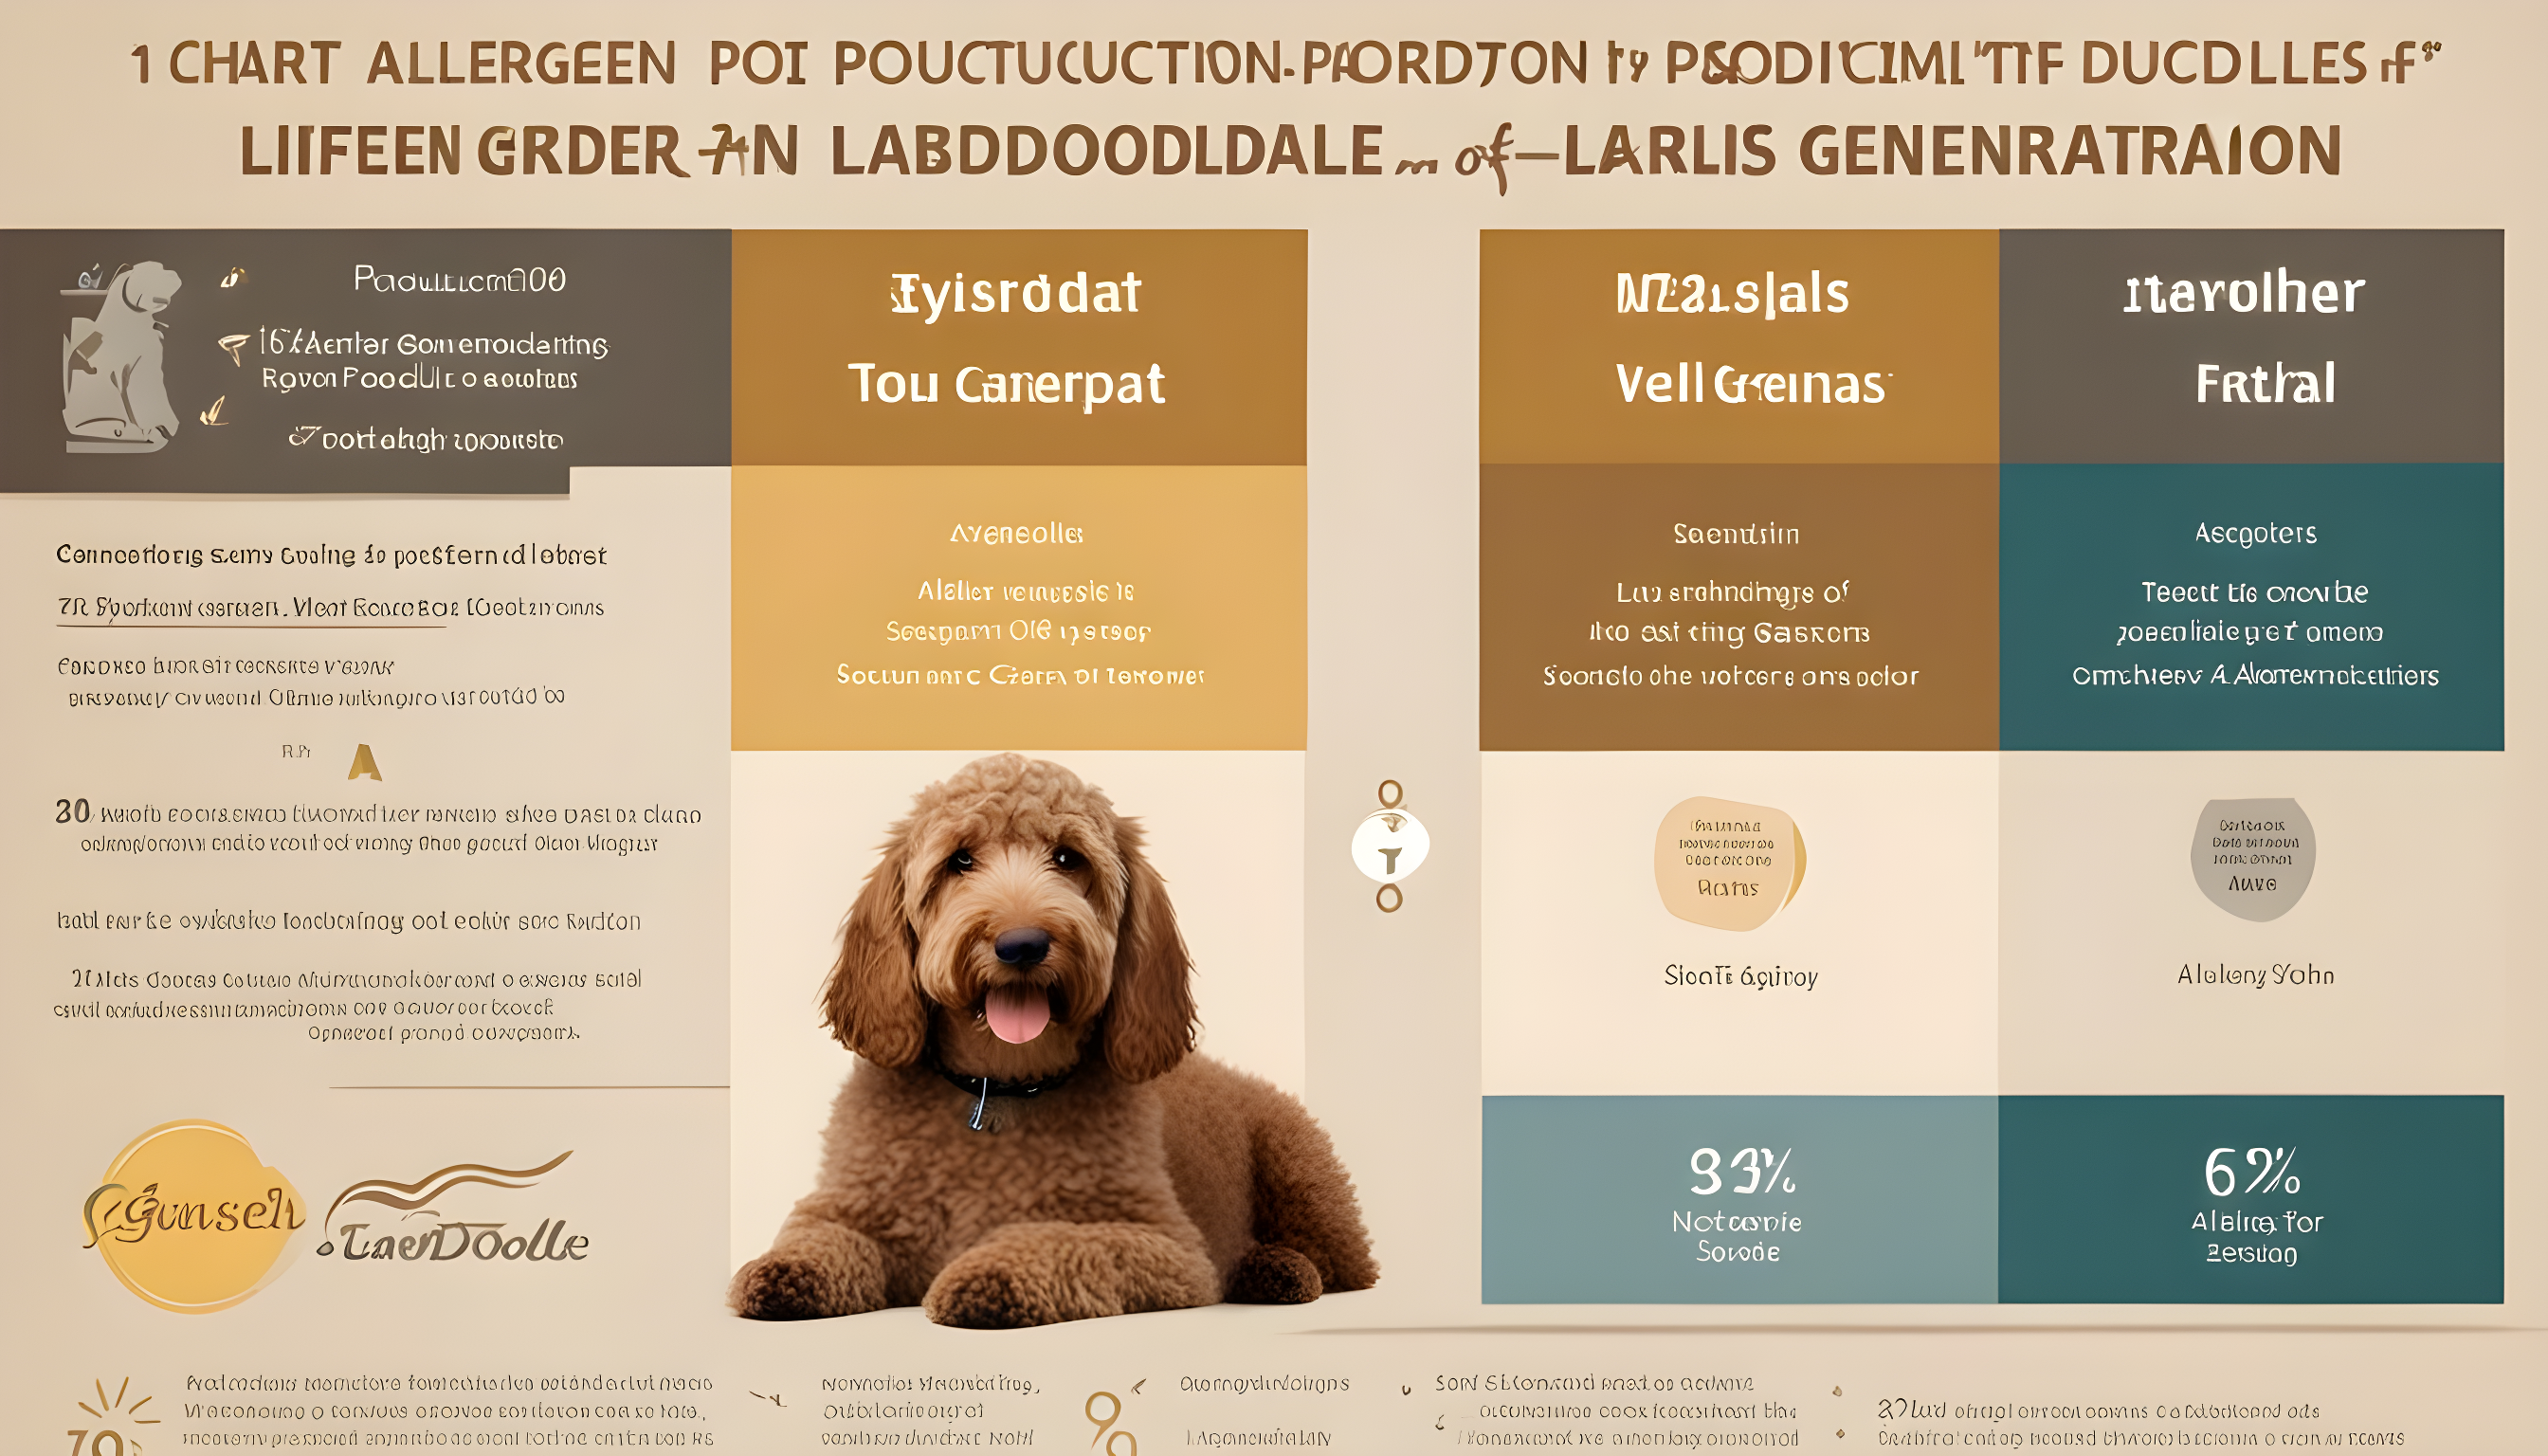 A chart comparing the allergen production levels of different Labradoodle generations